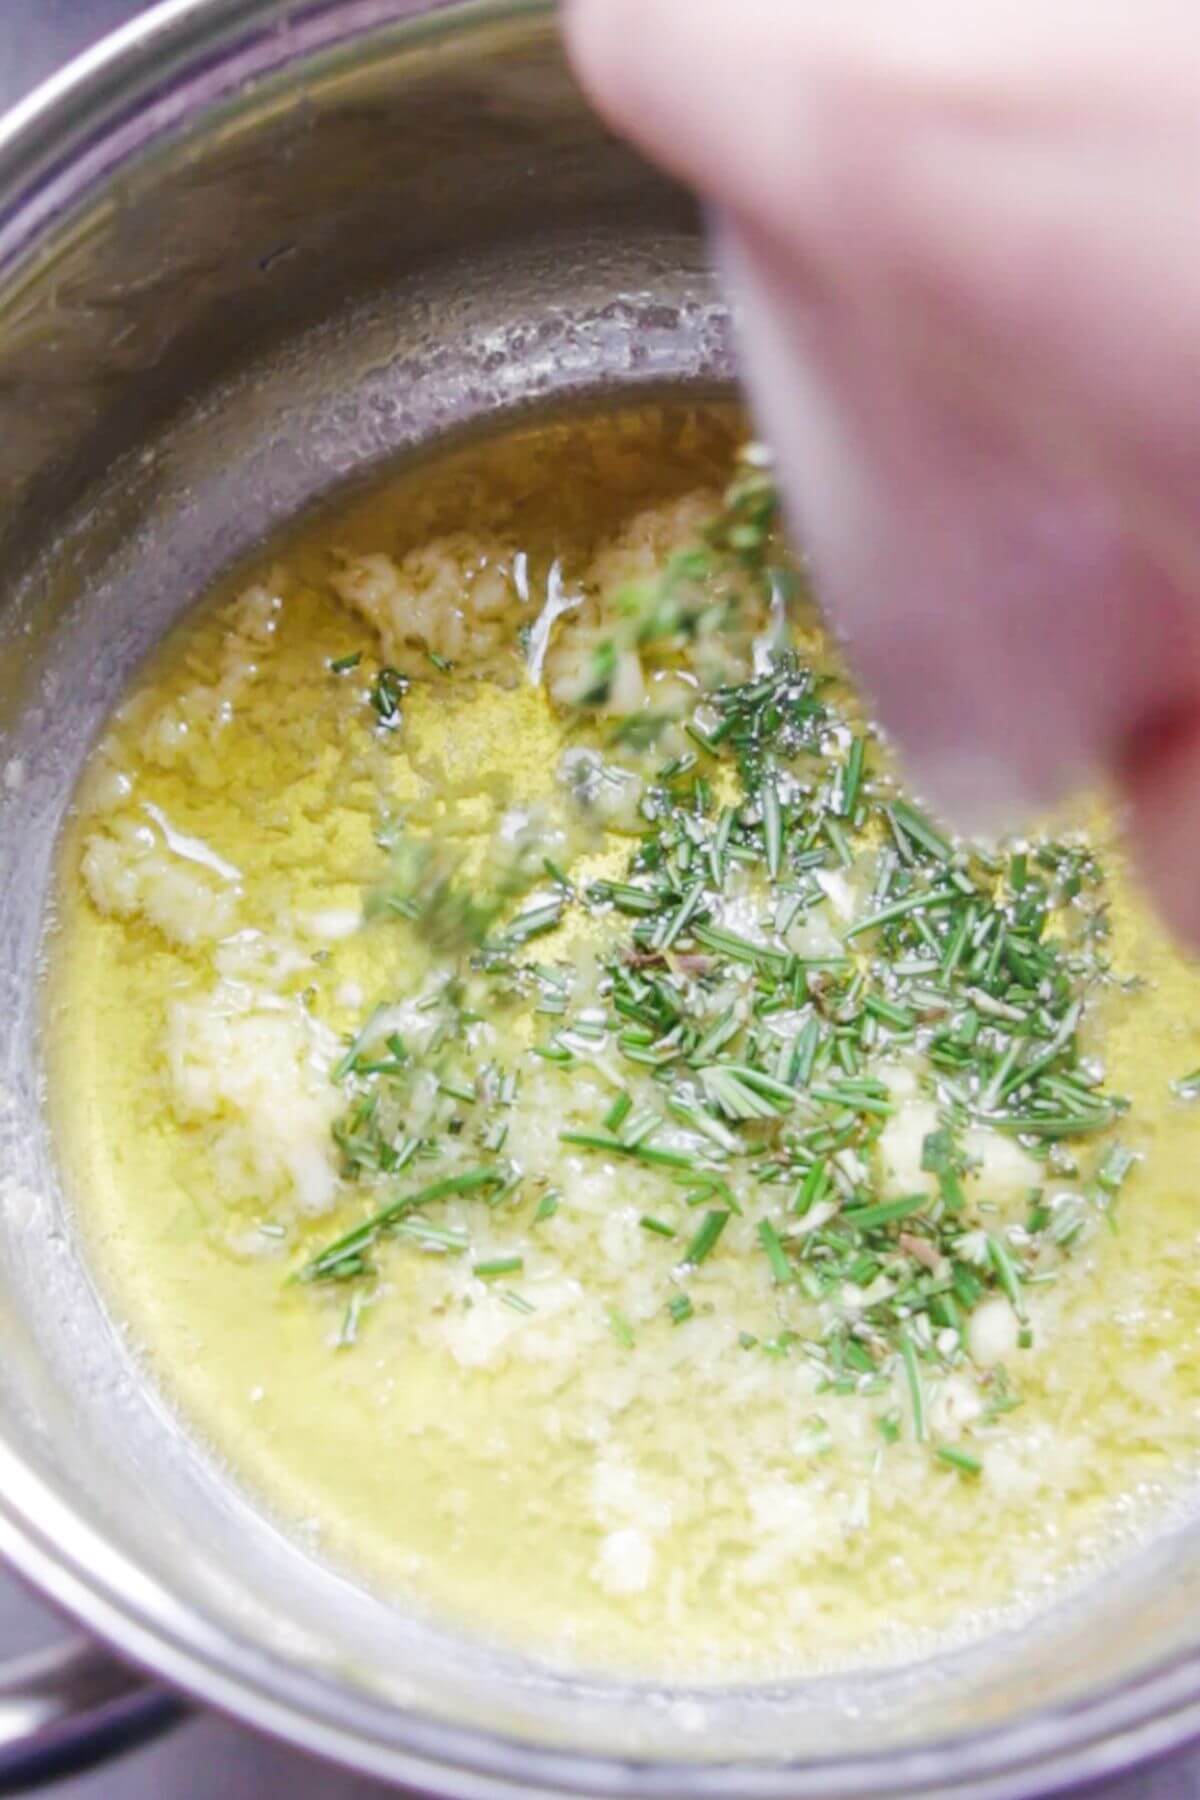 Melted butter and crushed garlic in a small silver pot, with chopped rosemary being added.